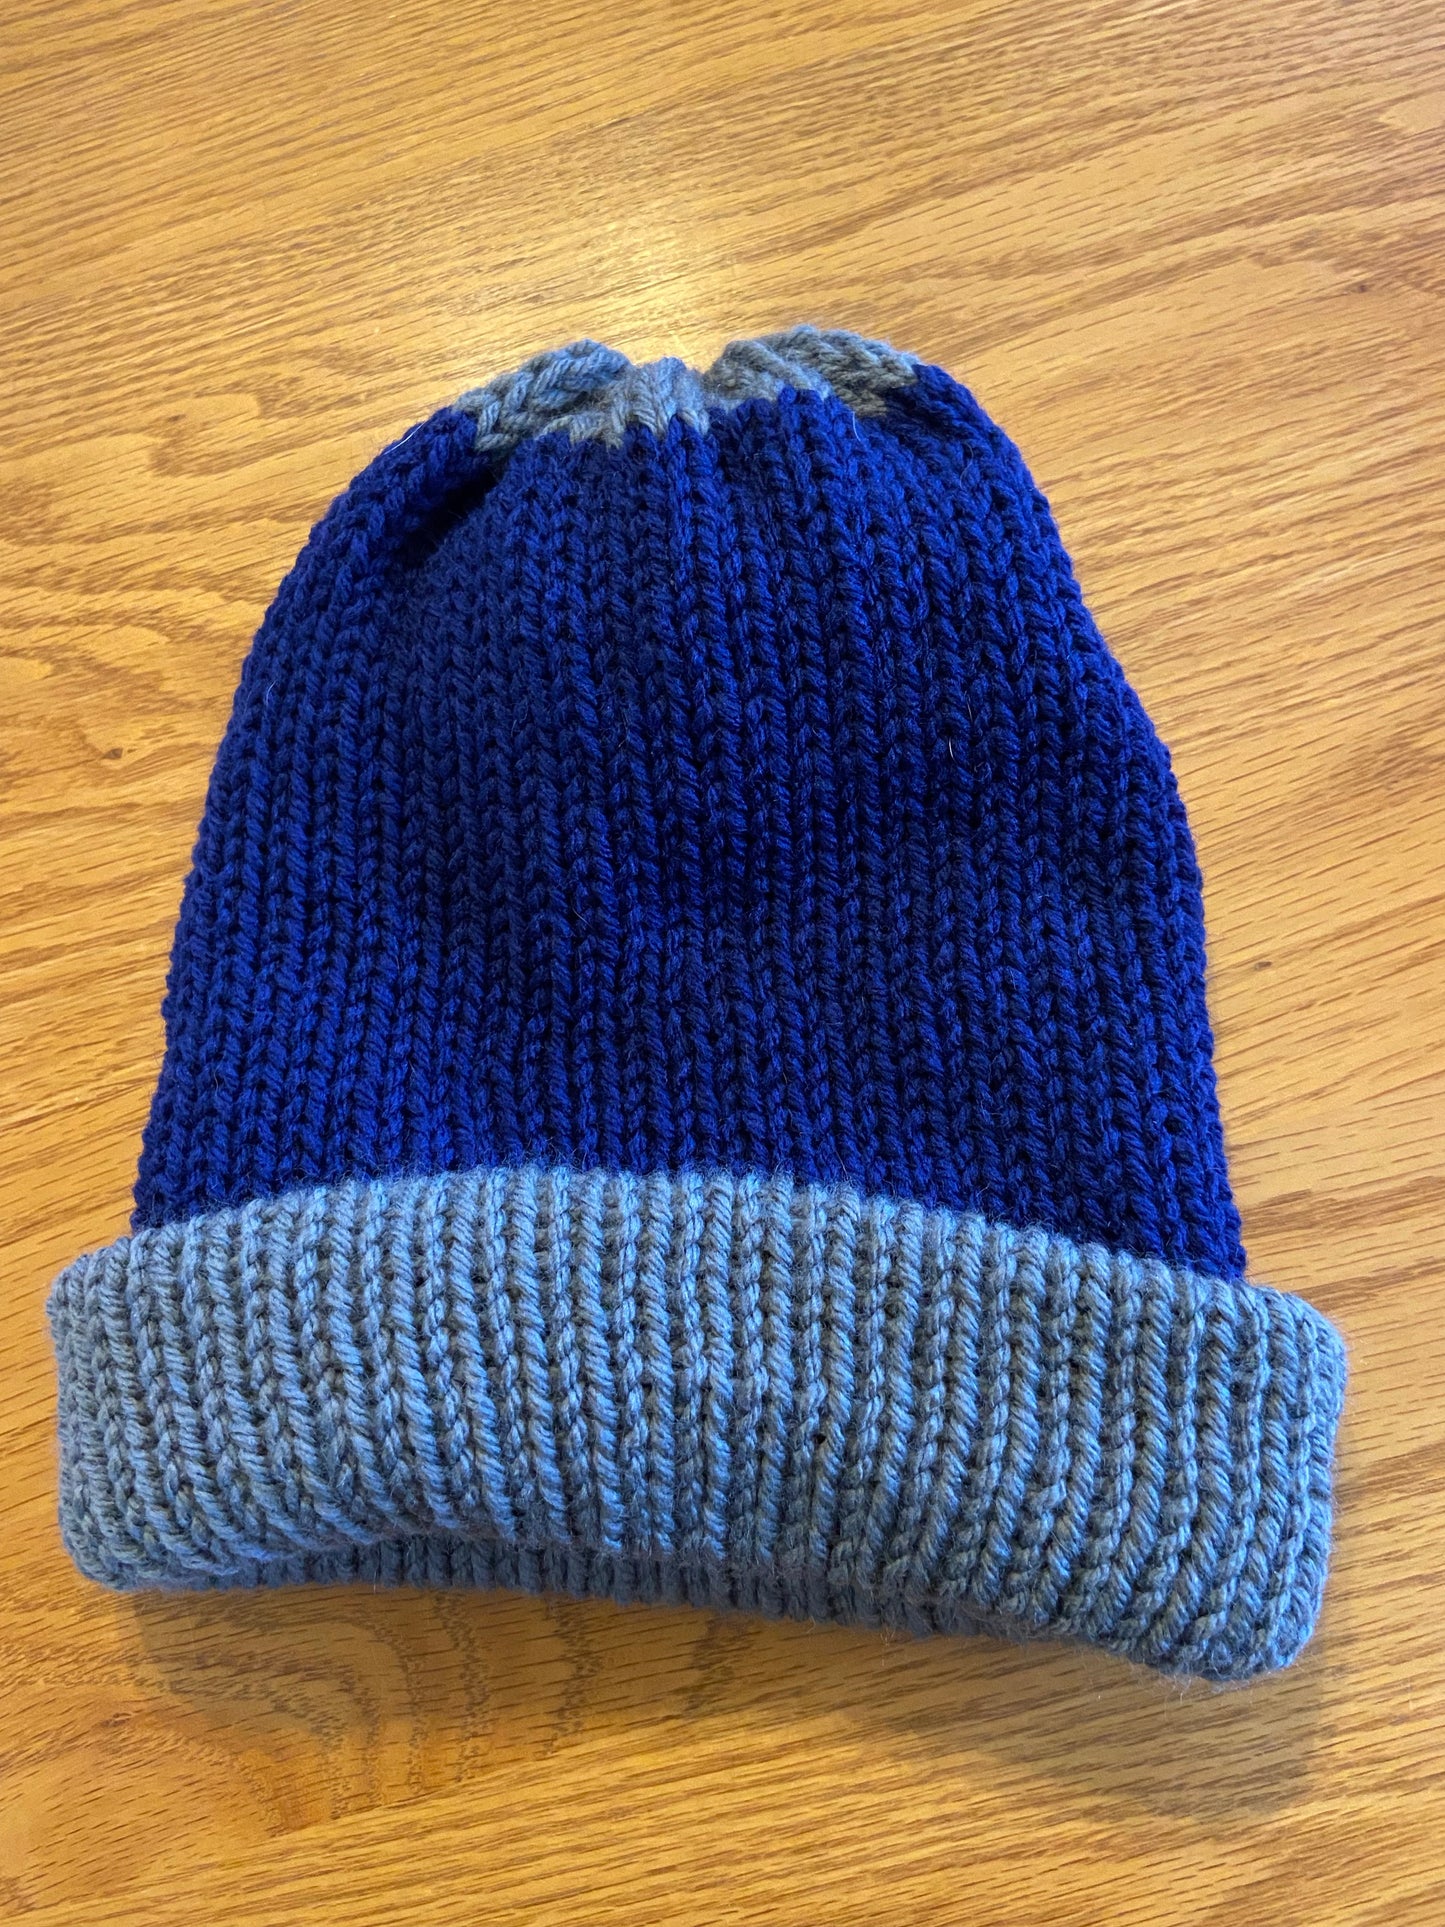 A Simple Chore Hat